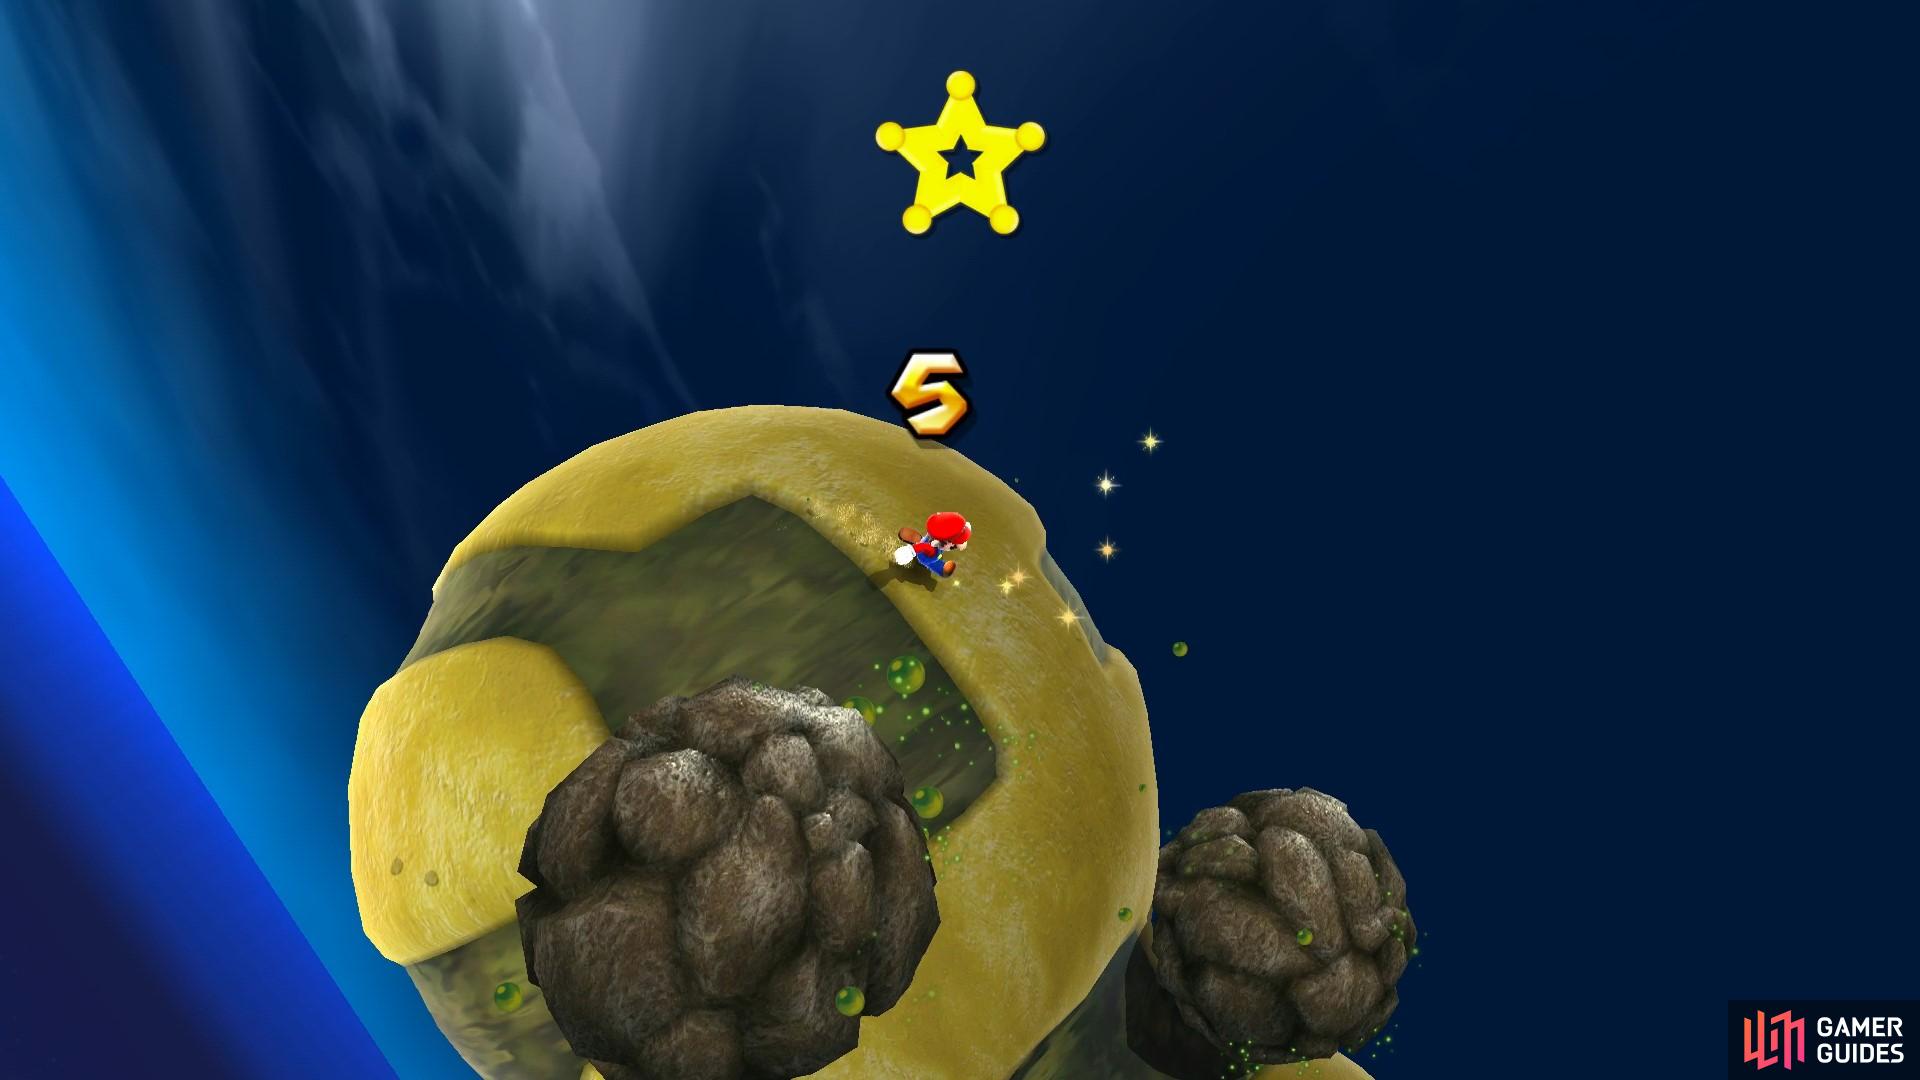 The Boulders won’t stop for Mario if he gets in their way!